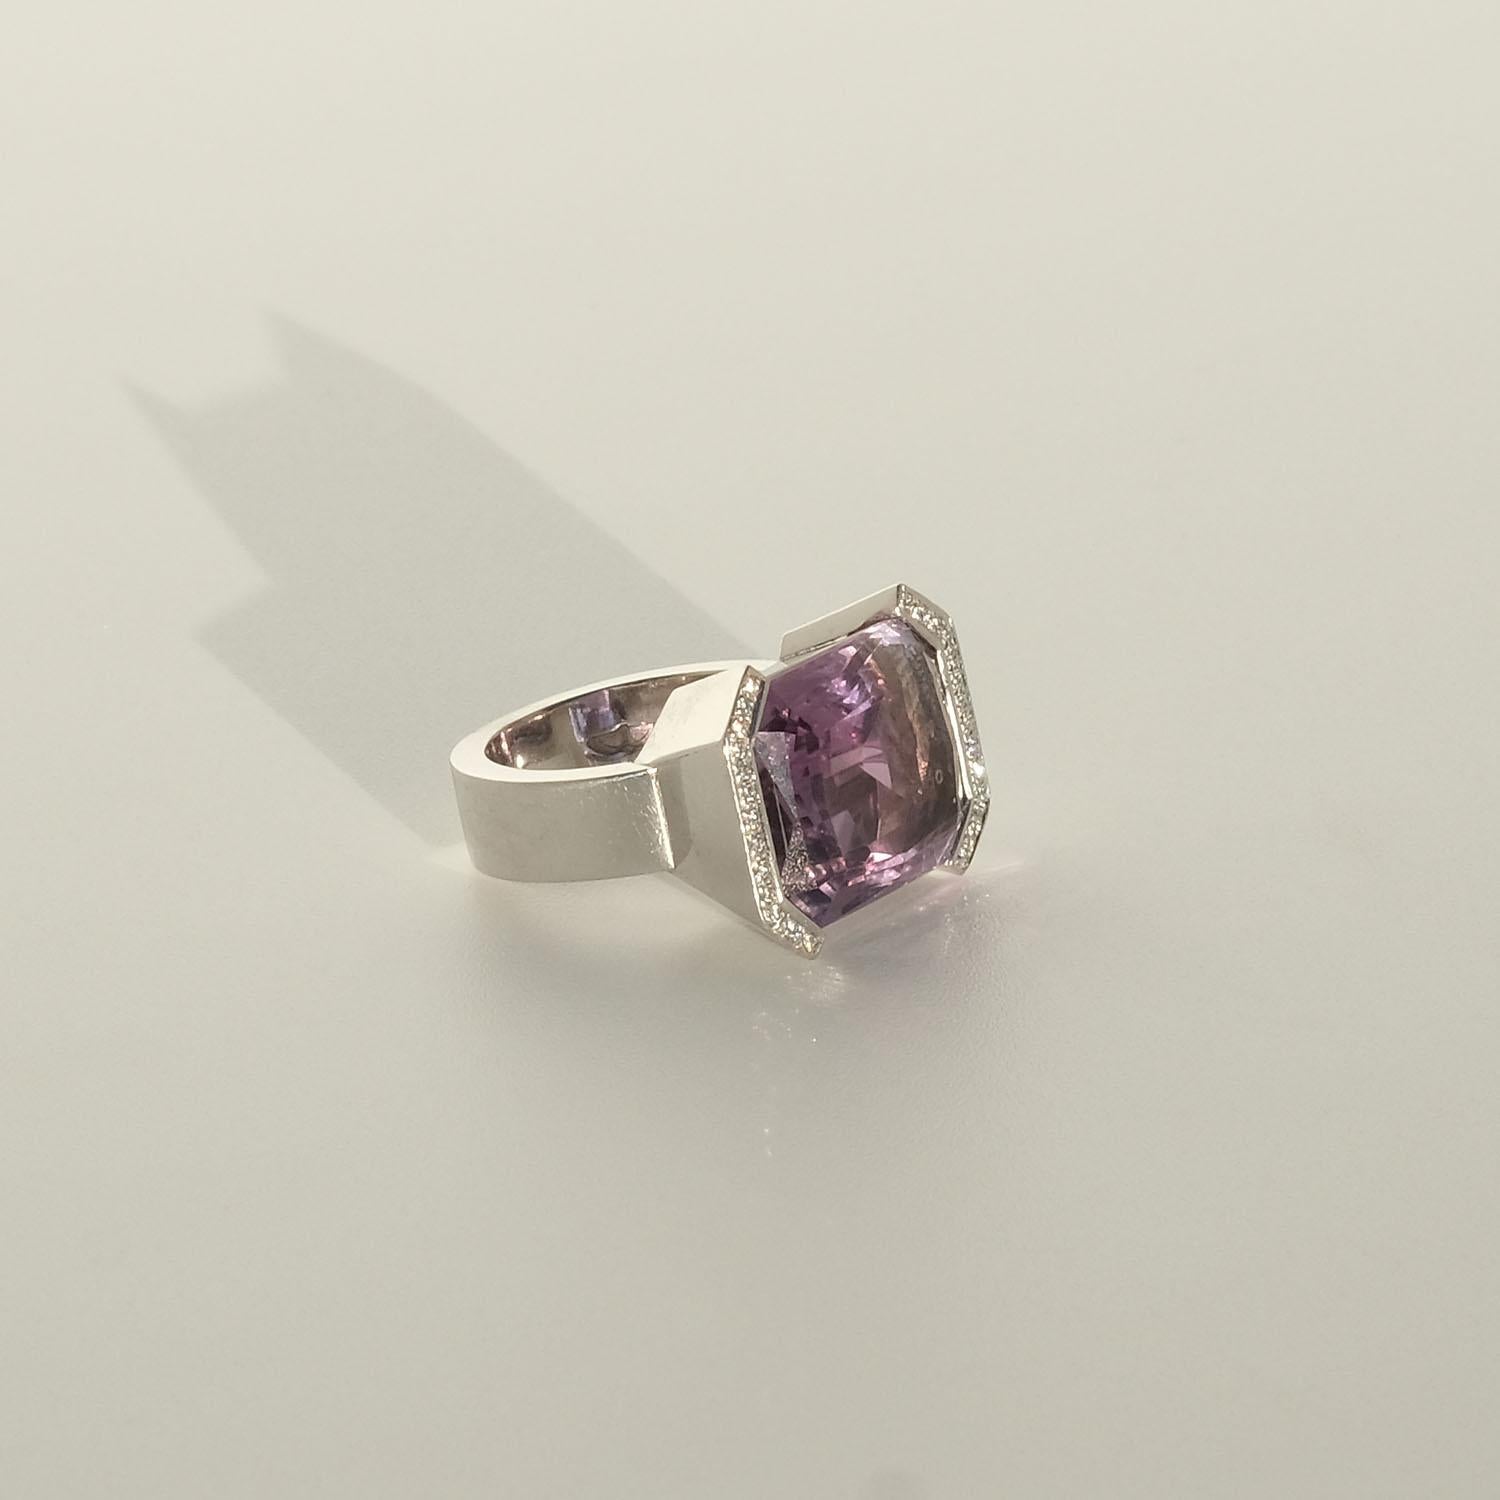 18k White Gold, Diamonds and Amethyst Ring by Swedish Lotta Torstensson For Sale 5